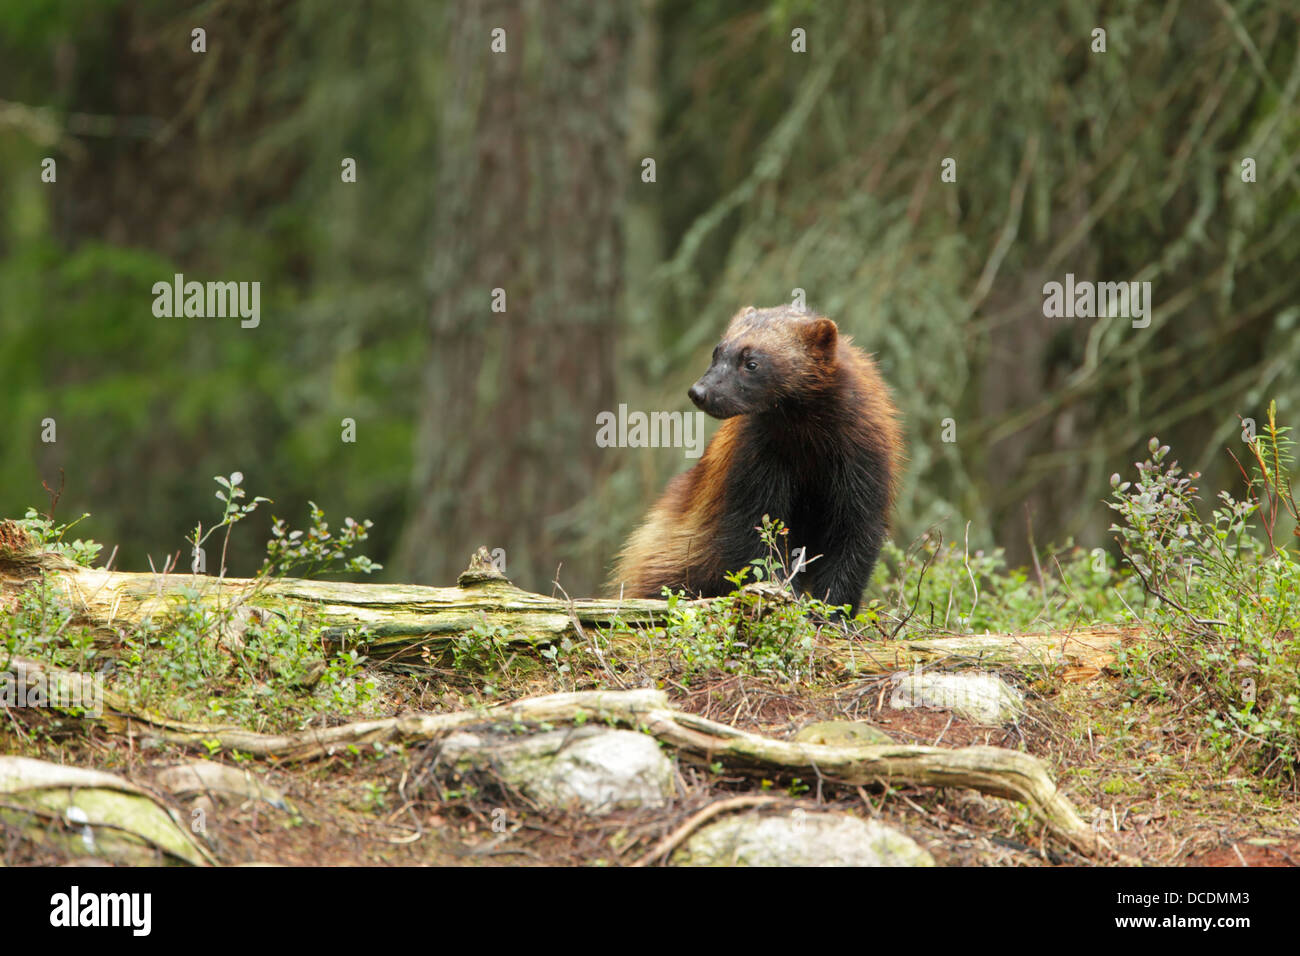 A wild and free wolverine (Gulo gulo) in a woodland setting Stock Photo